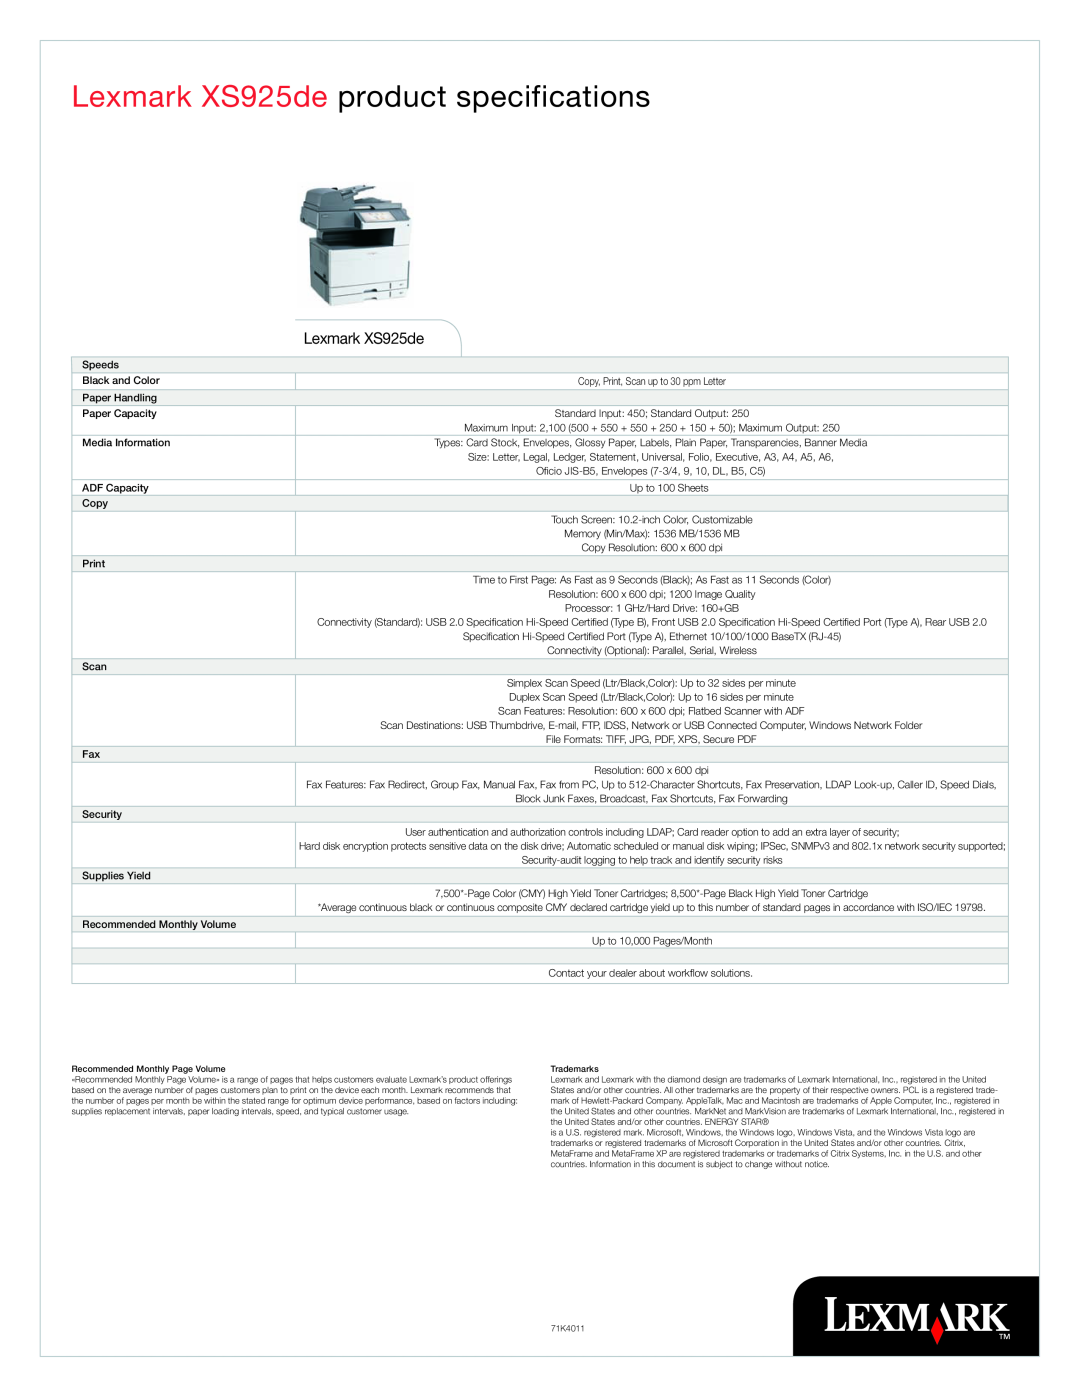 Lexmark Color MFP manual Lexmark XS925de product specifications 